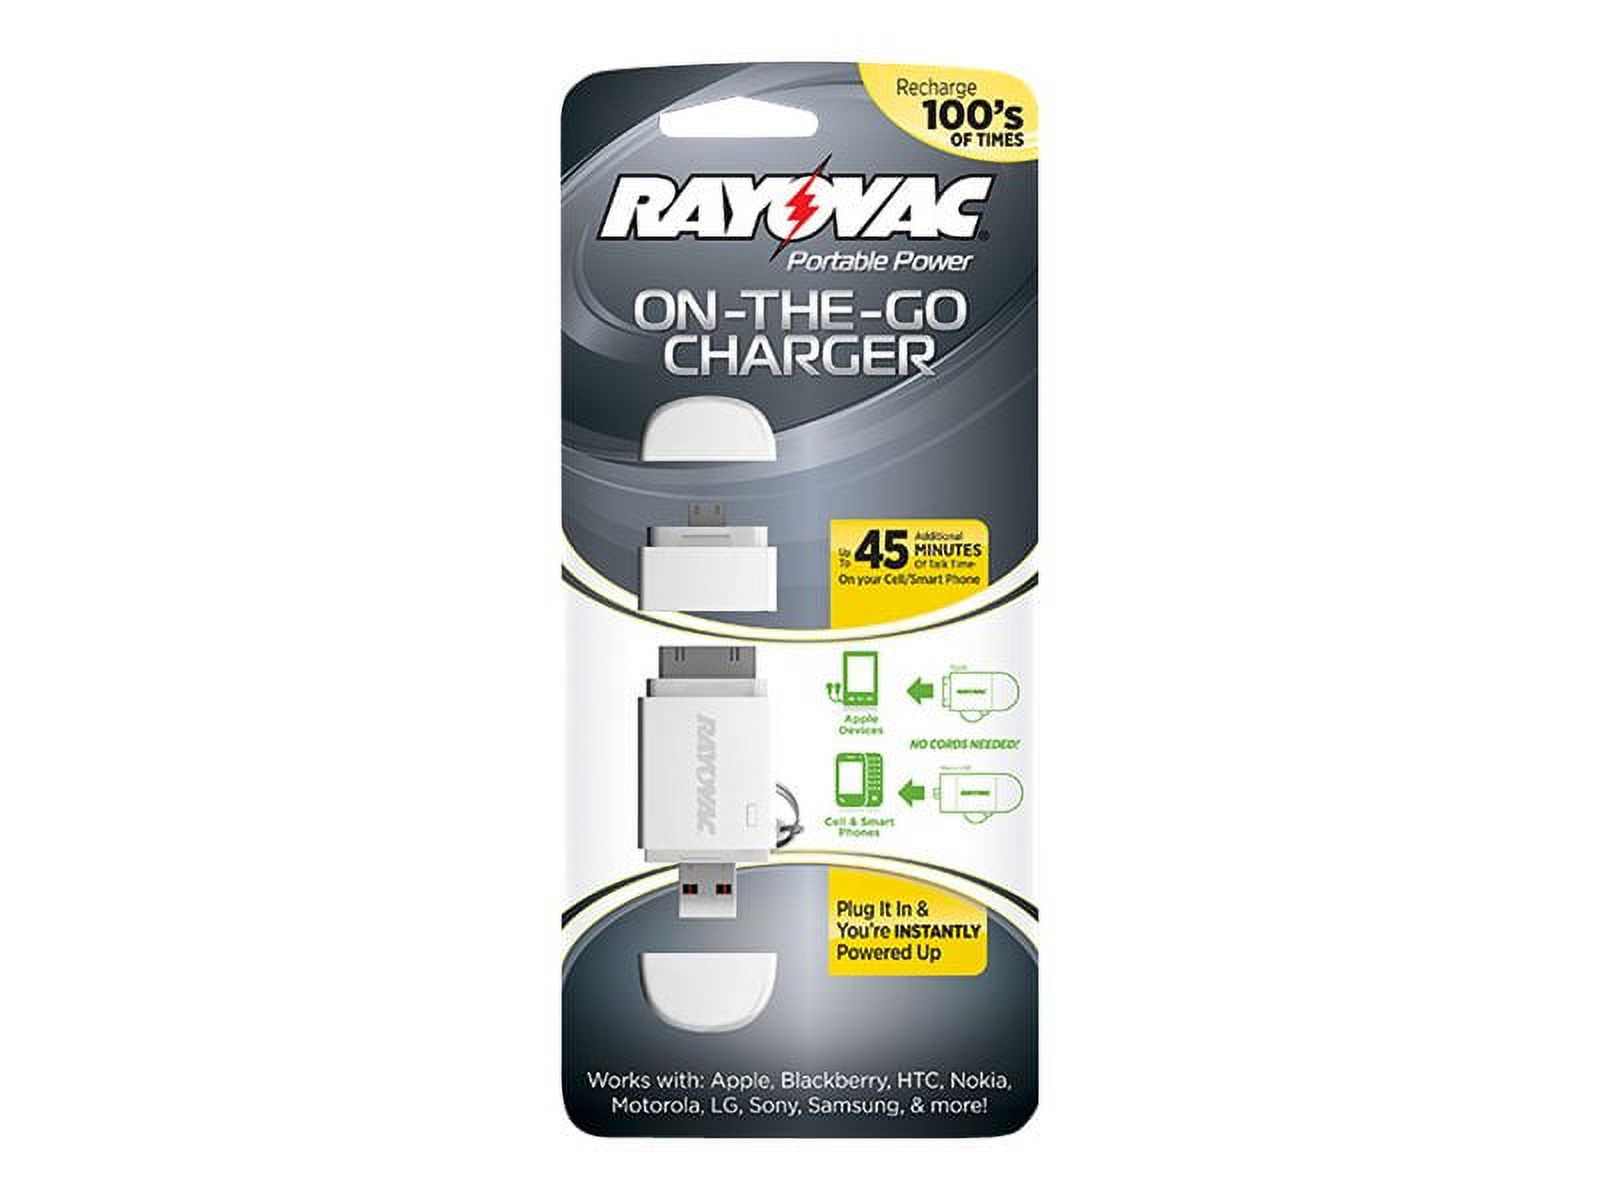 Rayovac Portable Power On-The-Go Charger - External battery pack - Li-Ion - 400 mAh - for Apple iPad/iPhone/iPod - image 1 of 2